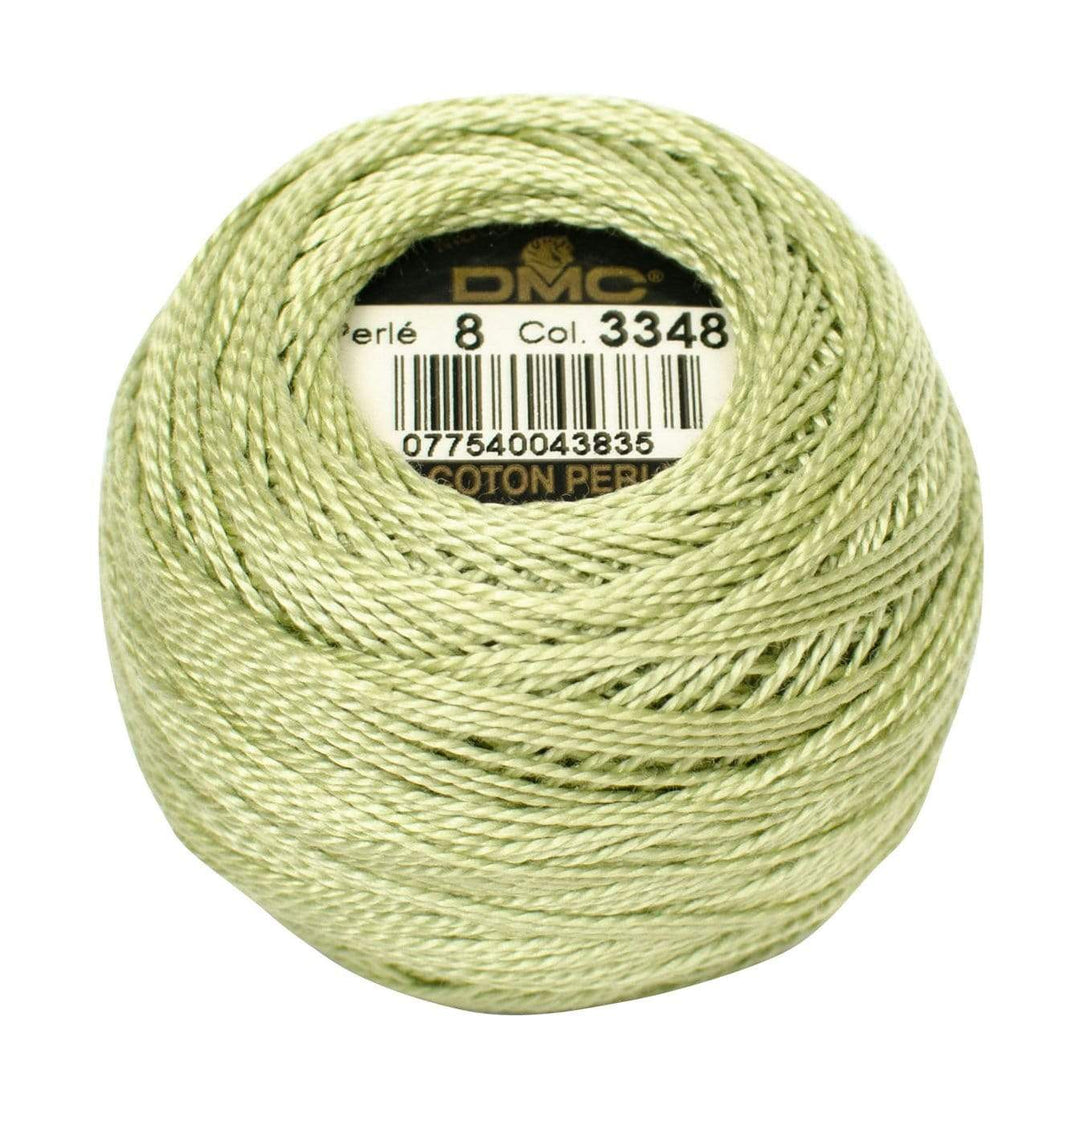 Size 8 Pearl Cotton Ball in Color 3348 ~ Light Yellow Green